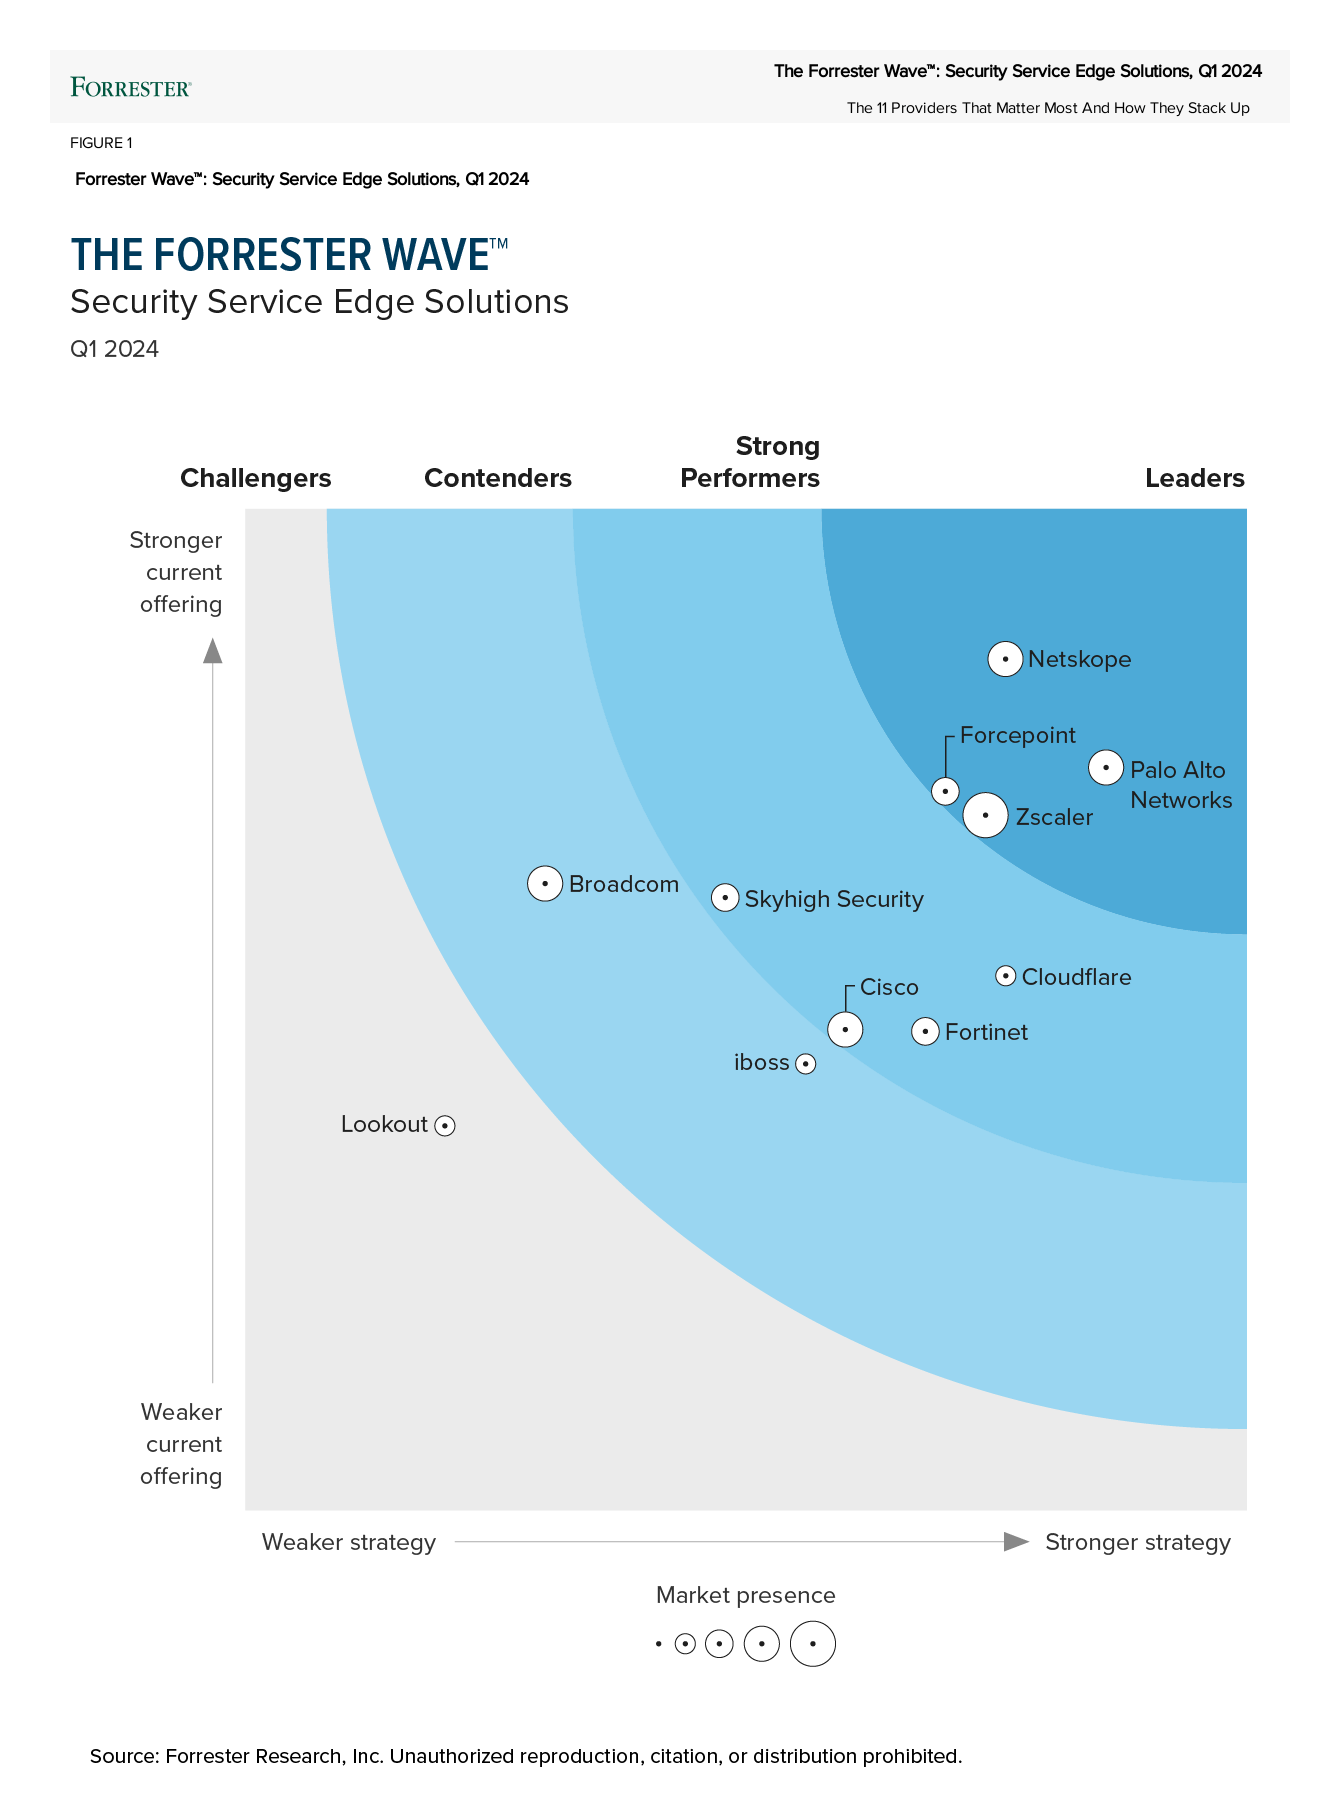 The Forrester Wave Security Service Edge Solutions Q1 2024 diagram